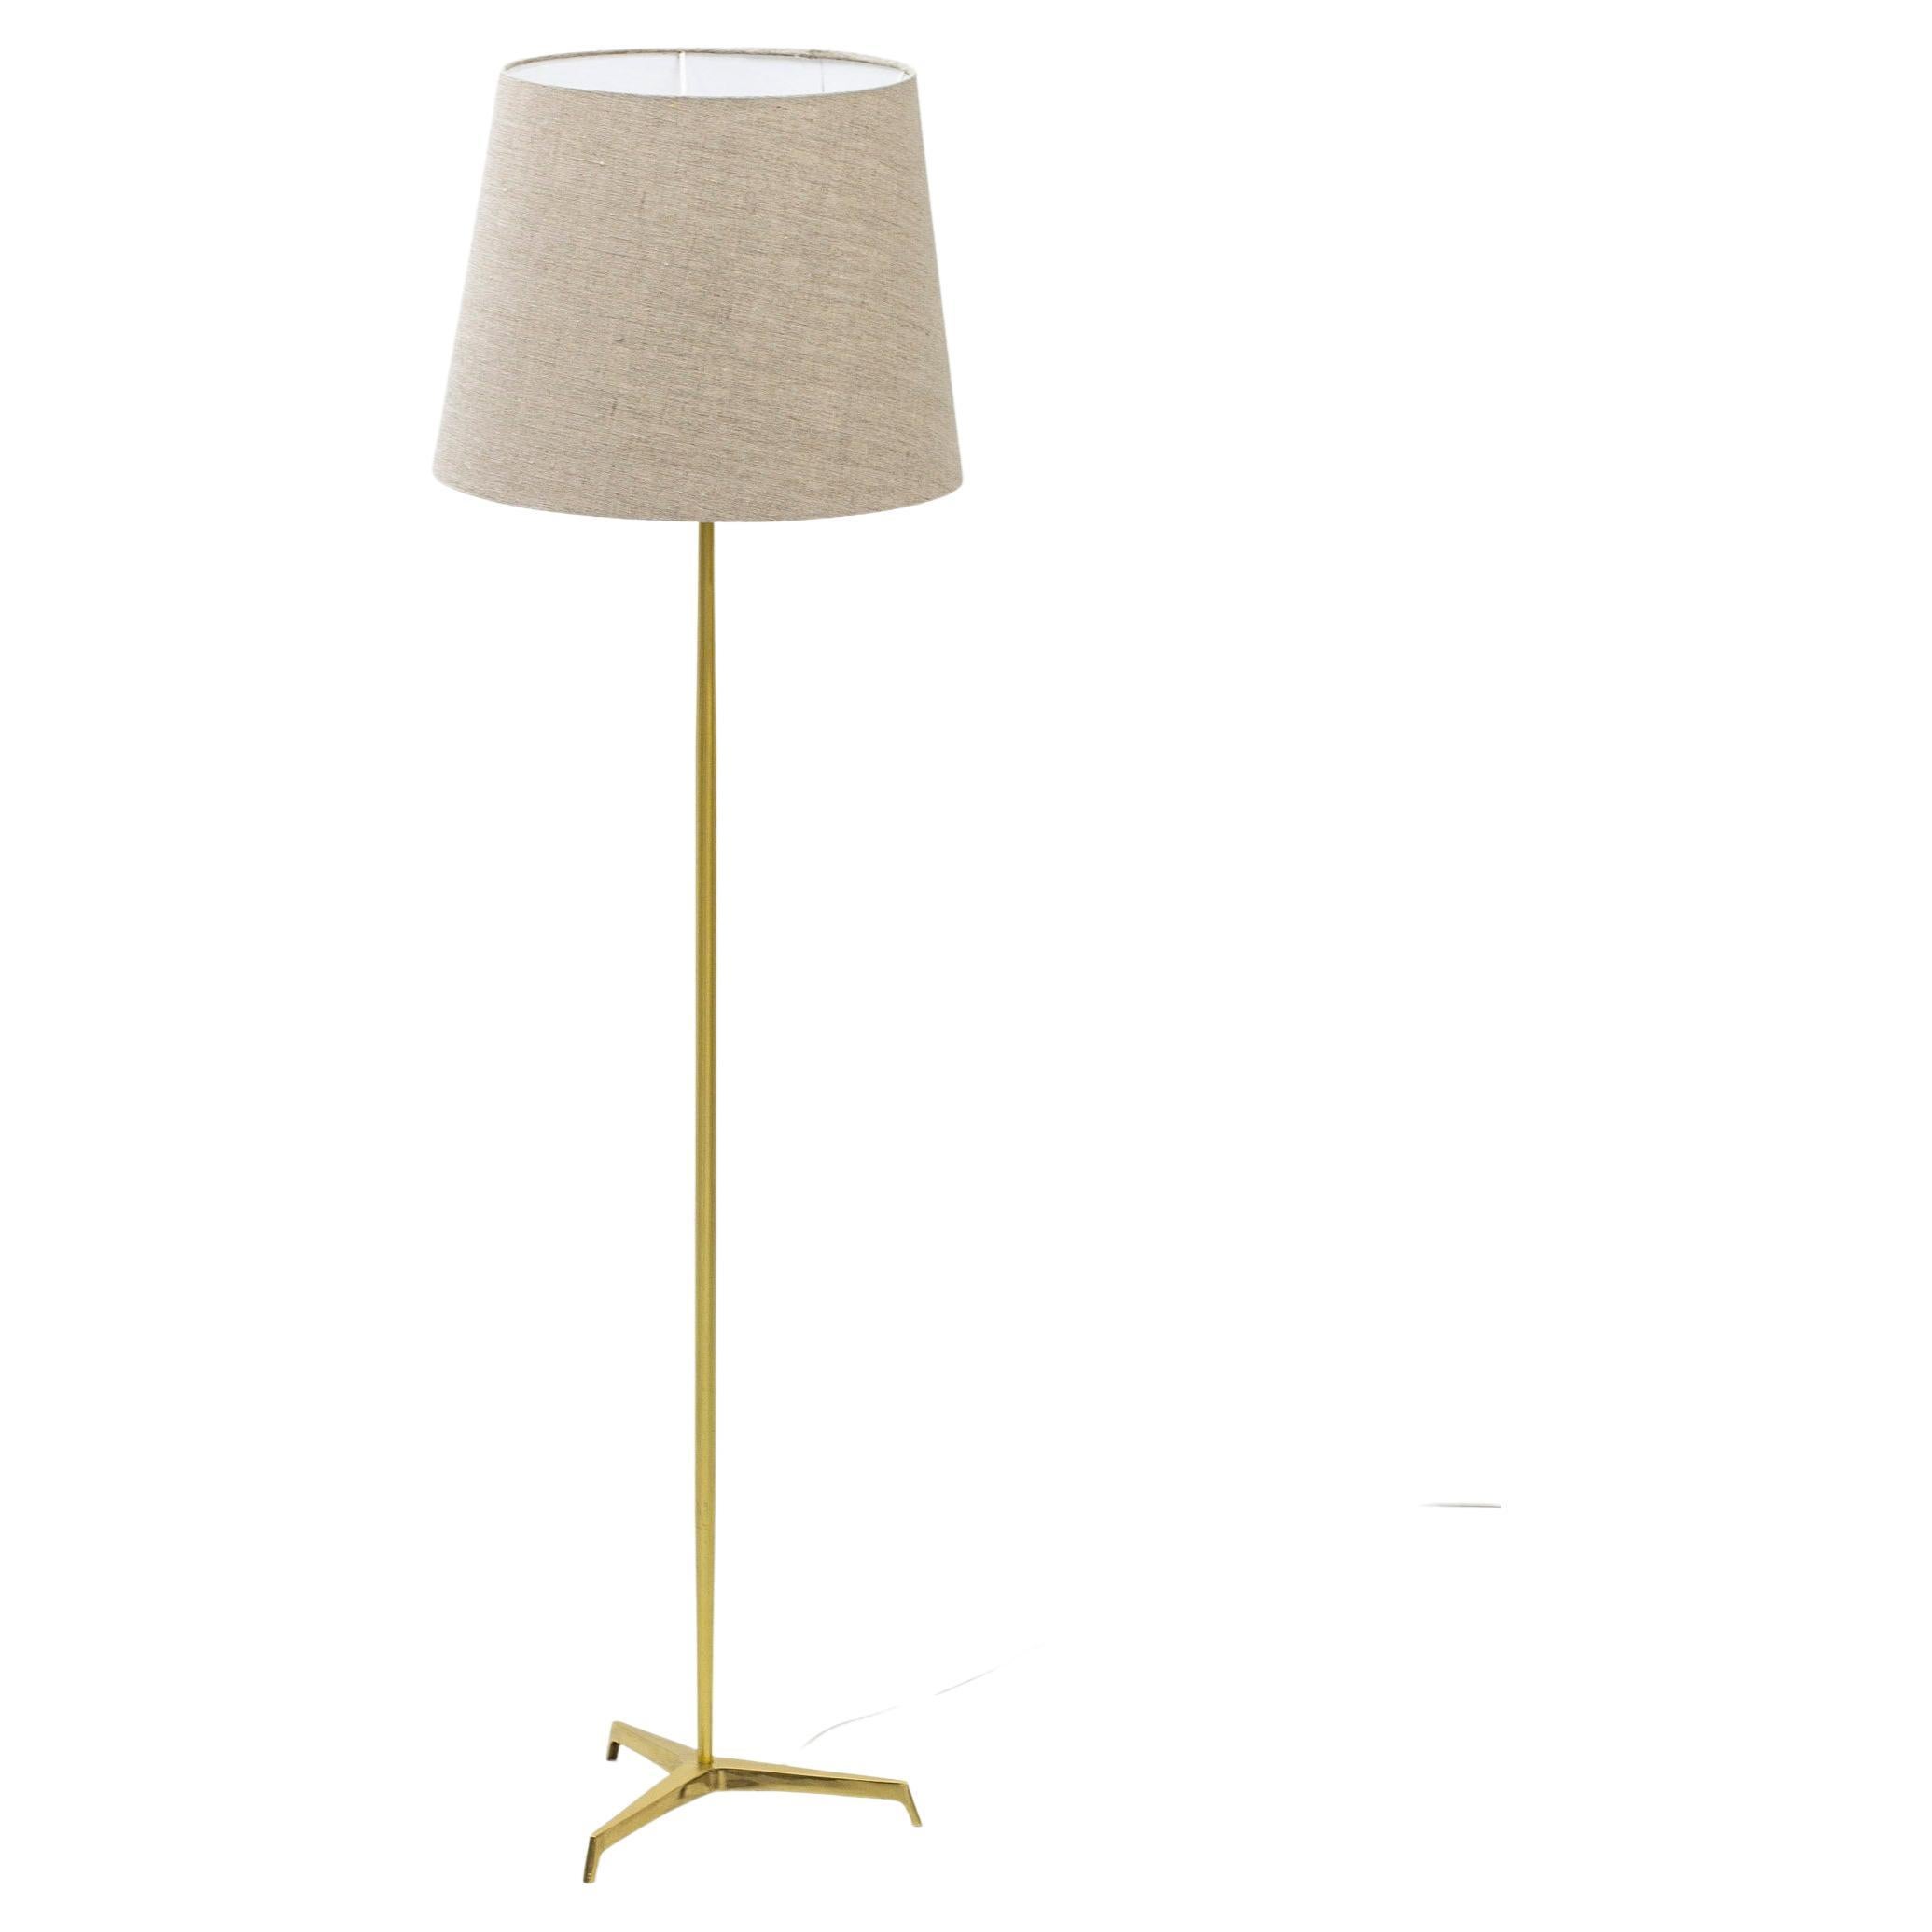 Swedish Tripod Floor Lamp in Polished Brass and Linen, Sweden, 1950s For Sale